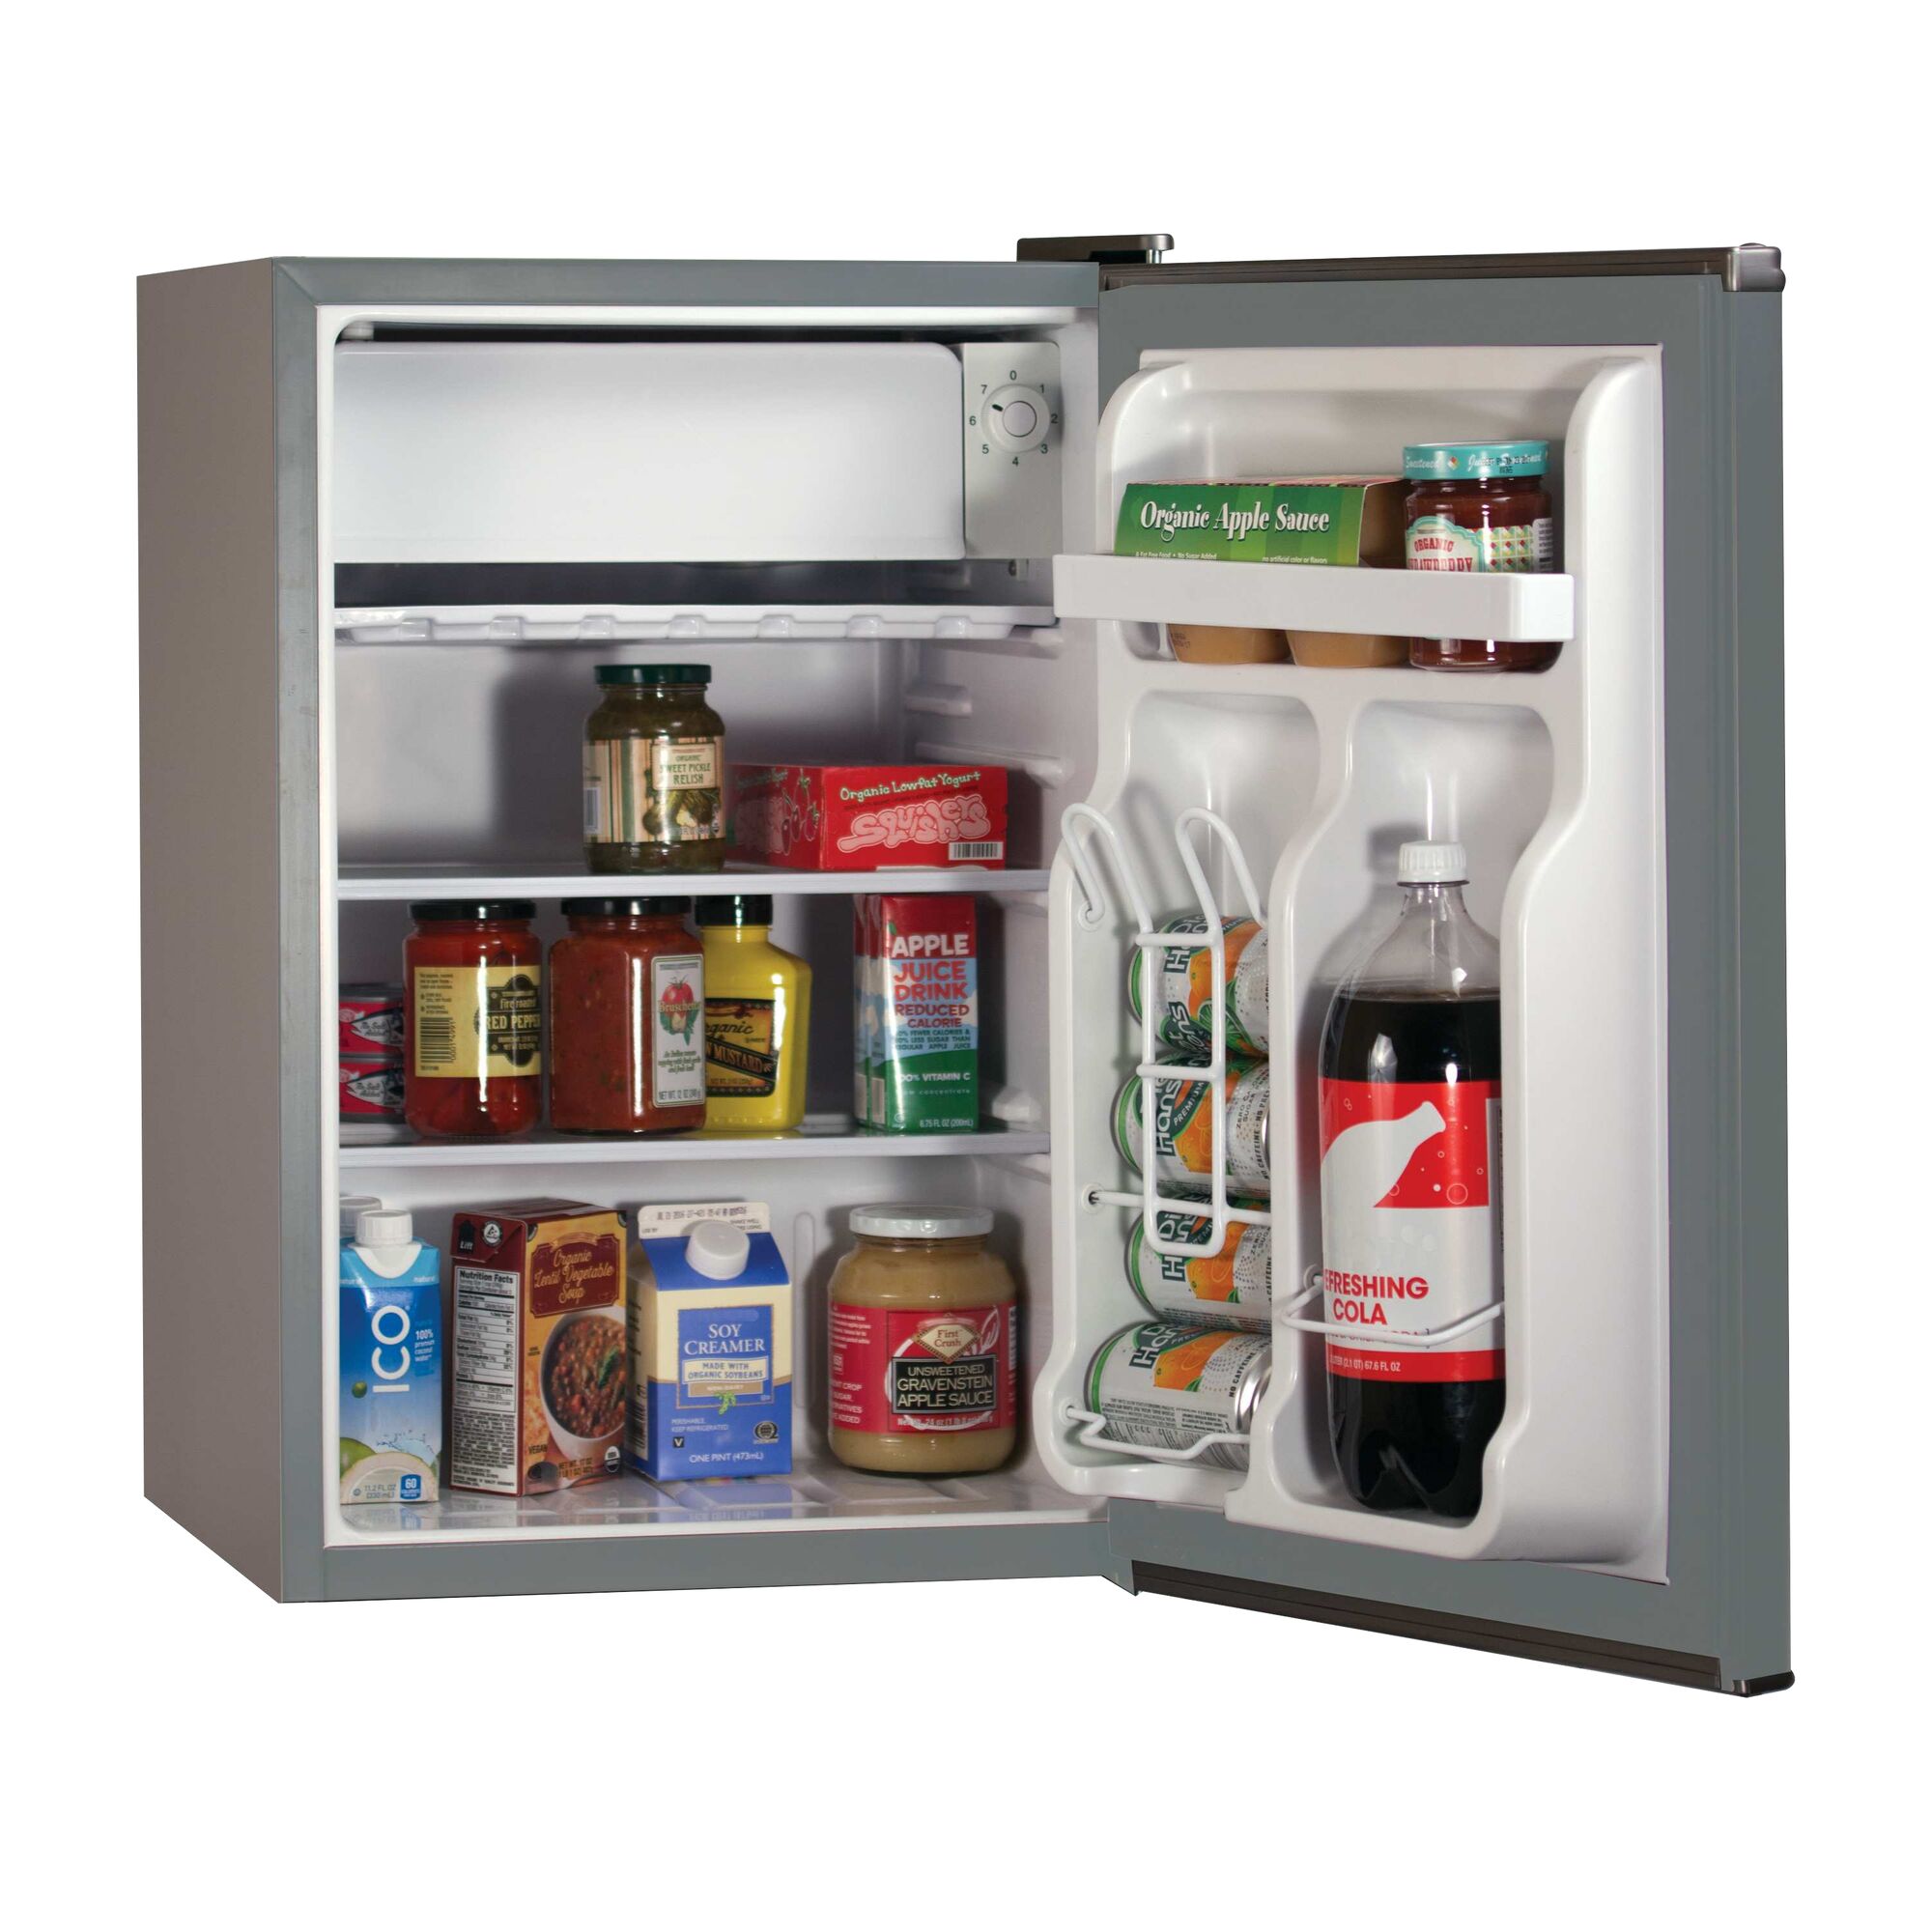 Profile of open 2.5 Cubic feet energy star refrigerator with freezer.